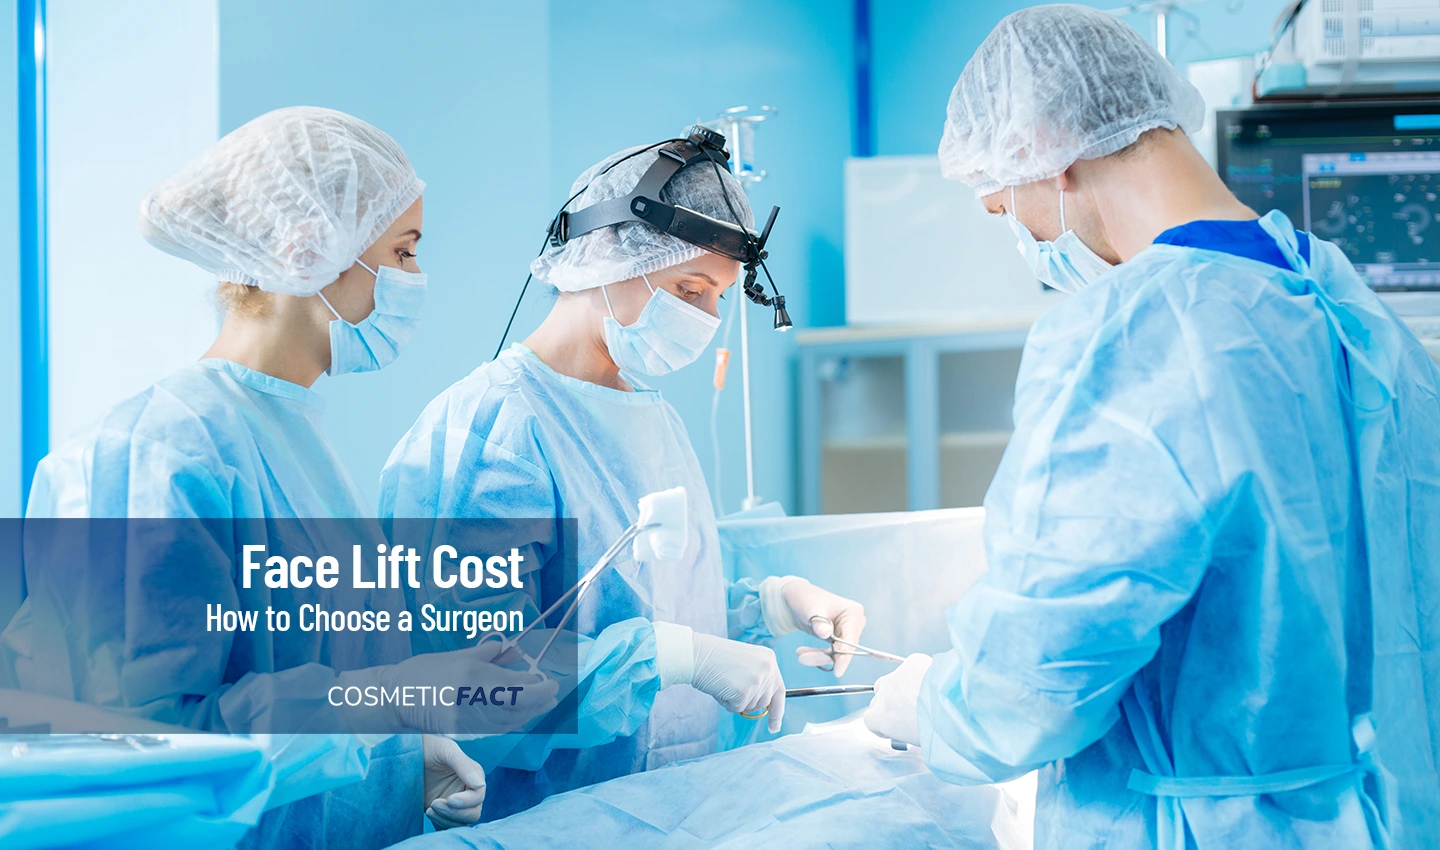 Affordable Facelift Surgery - Choosing a Surgeon